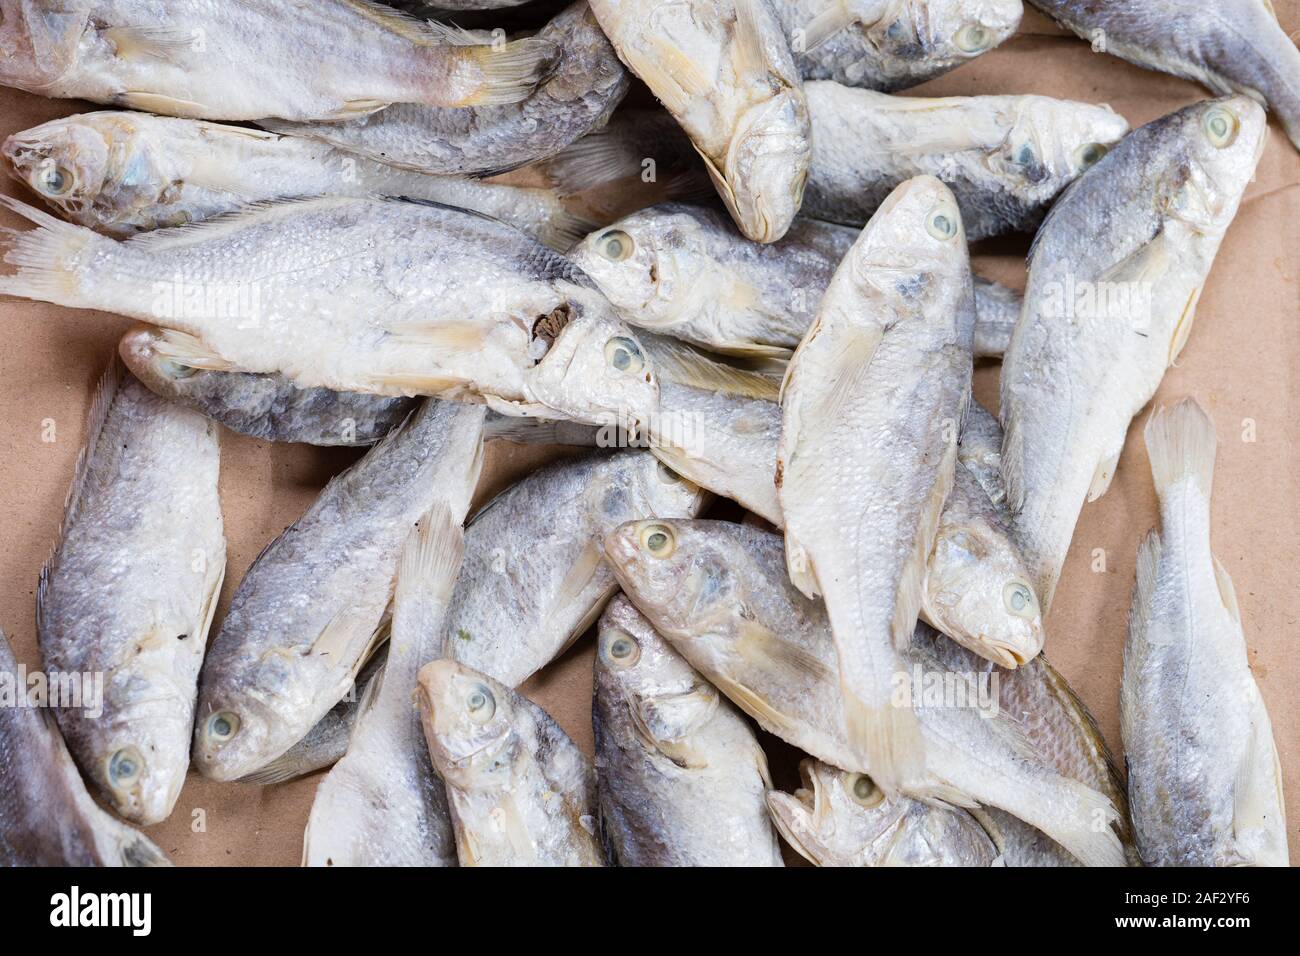 Salted fish or Sun dried fish as famous food in Indonesia Stock Photo